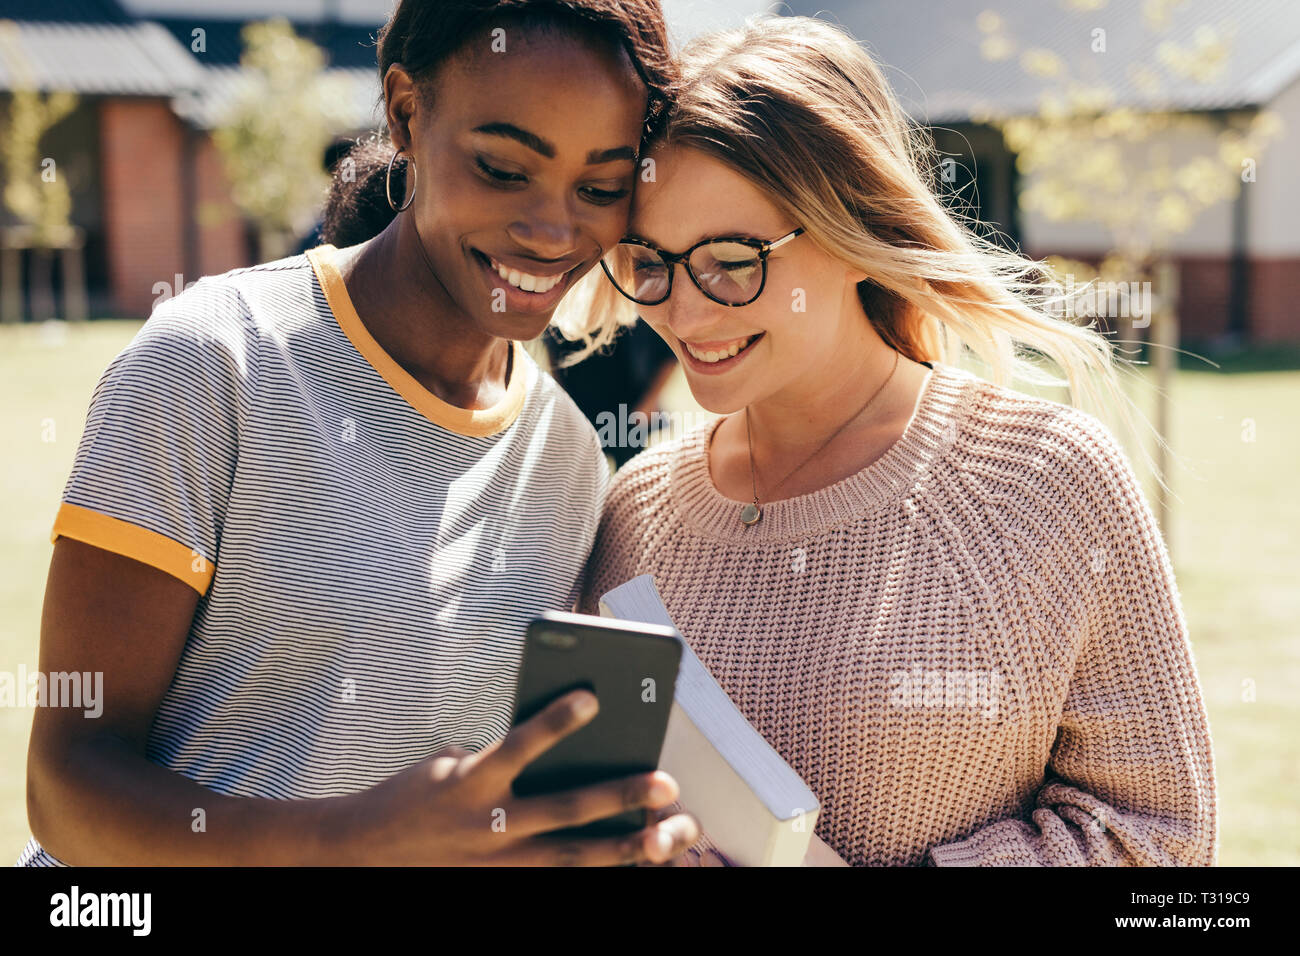 Young women taking selfie with mobile phone at university during break. Two high school girls with mobile phone outdoors in campus. Stock Photo